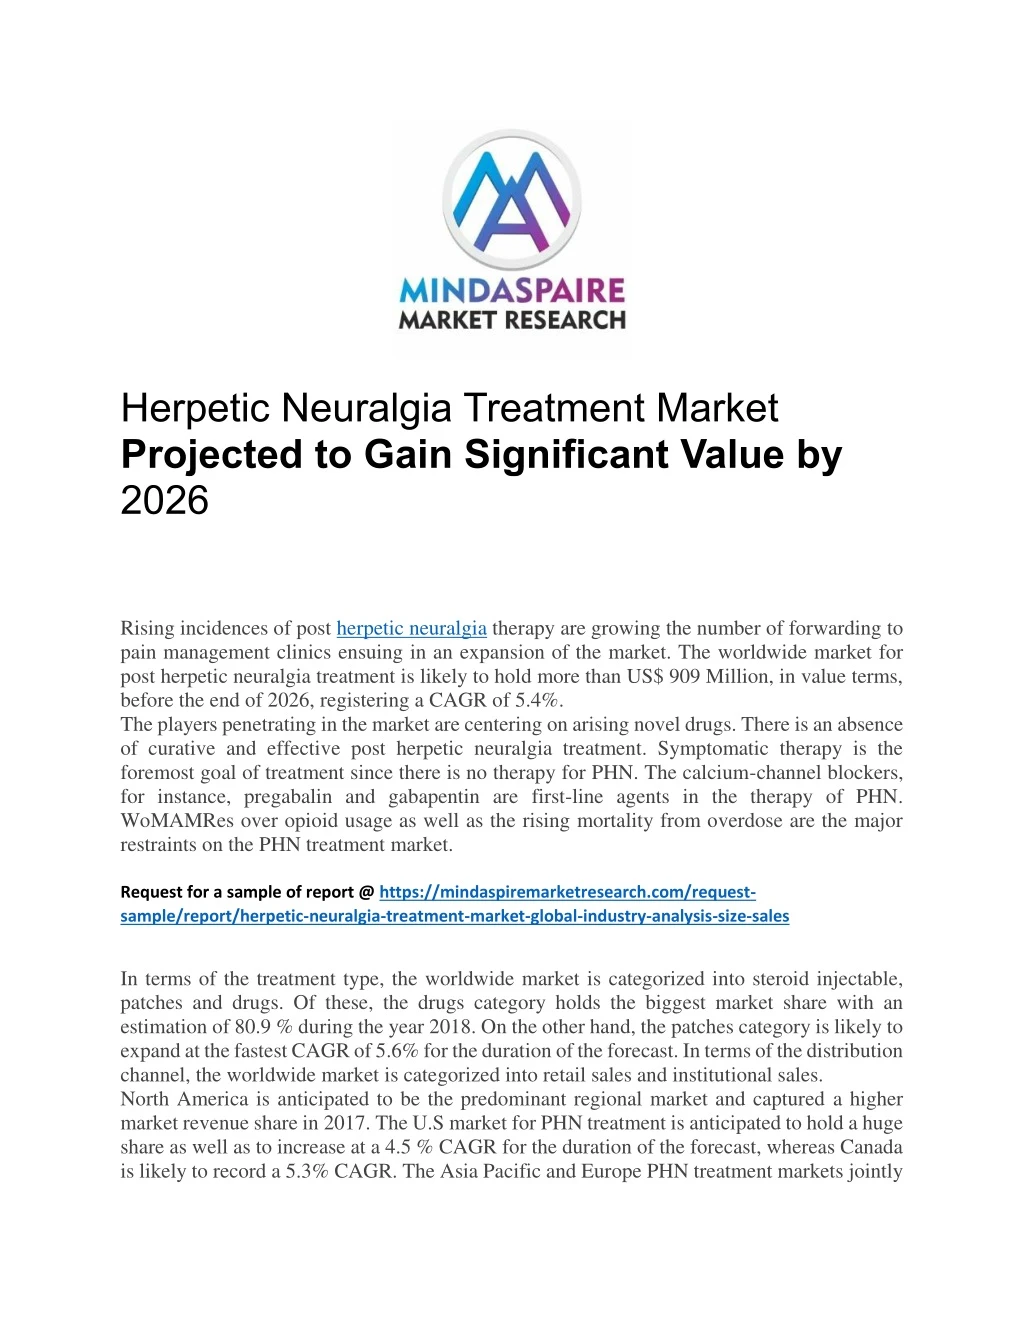 herpetic neuralgia treatment market projected